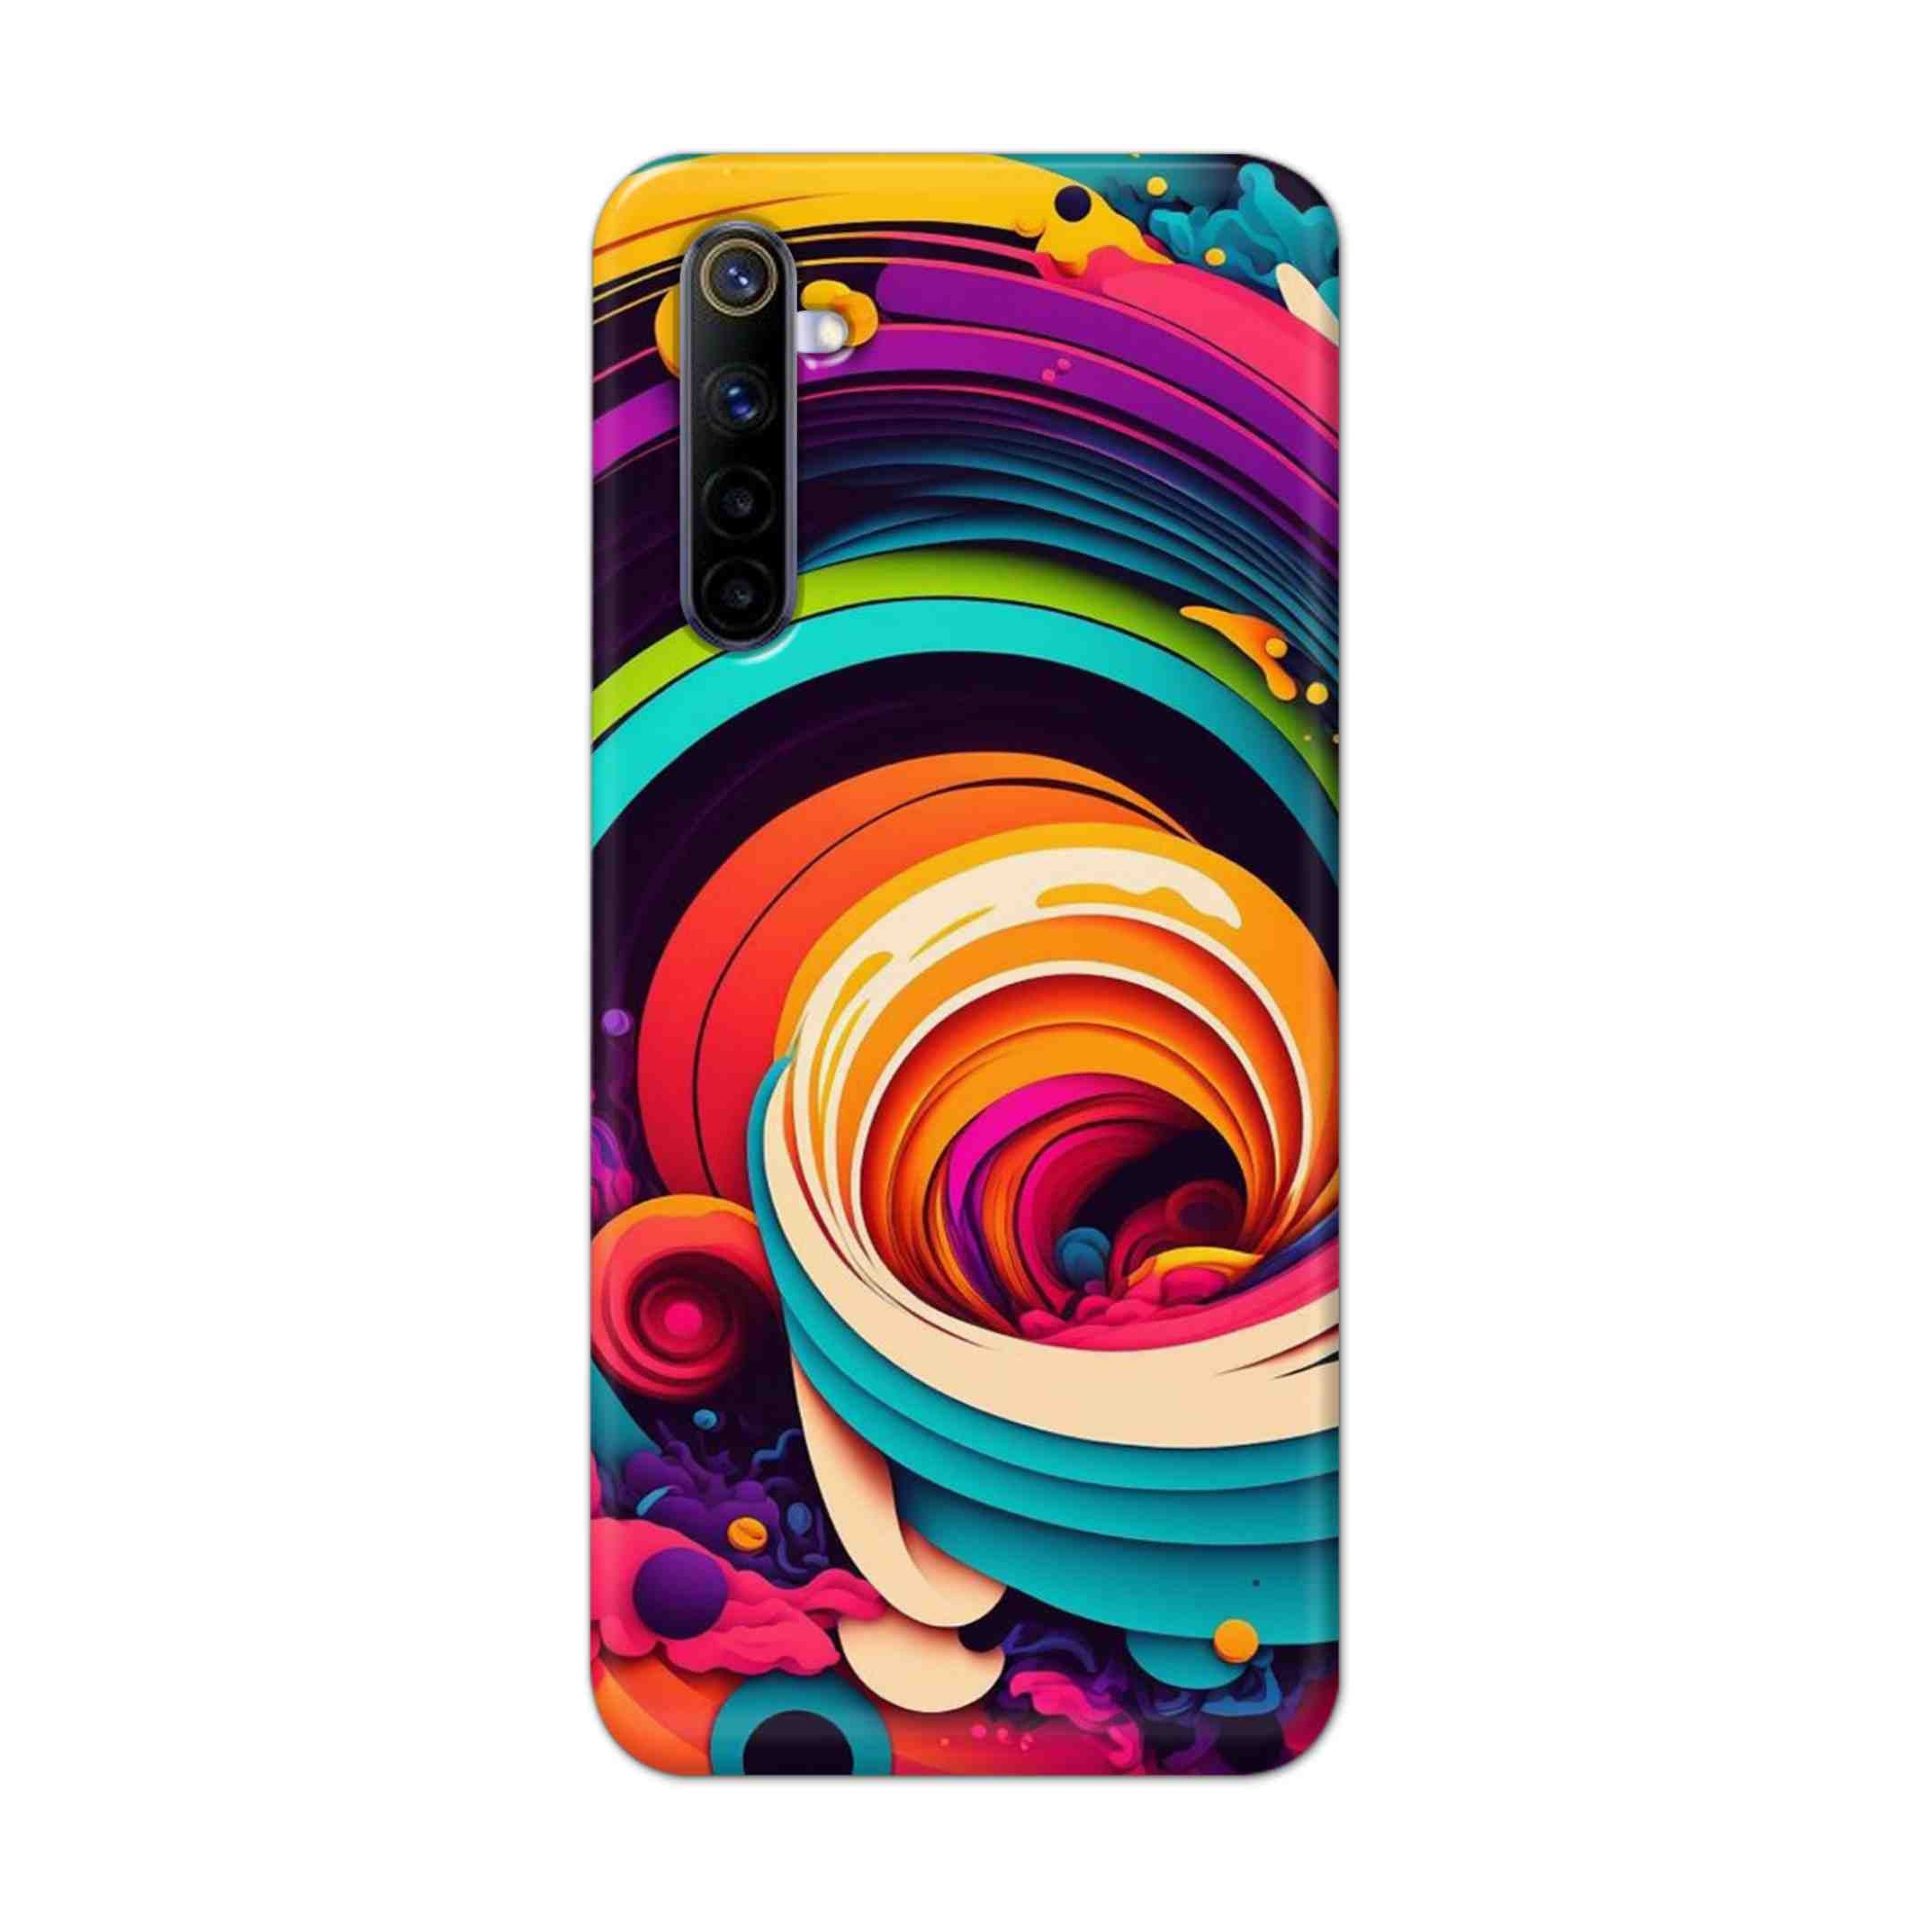 Buy Colour Circle Hard Back Mobile Phone Case Cover For REALME 6 PRO Online